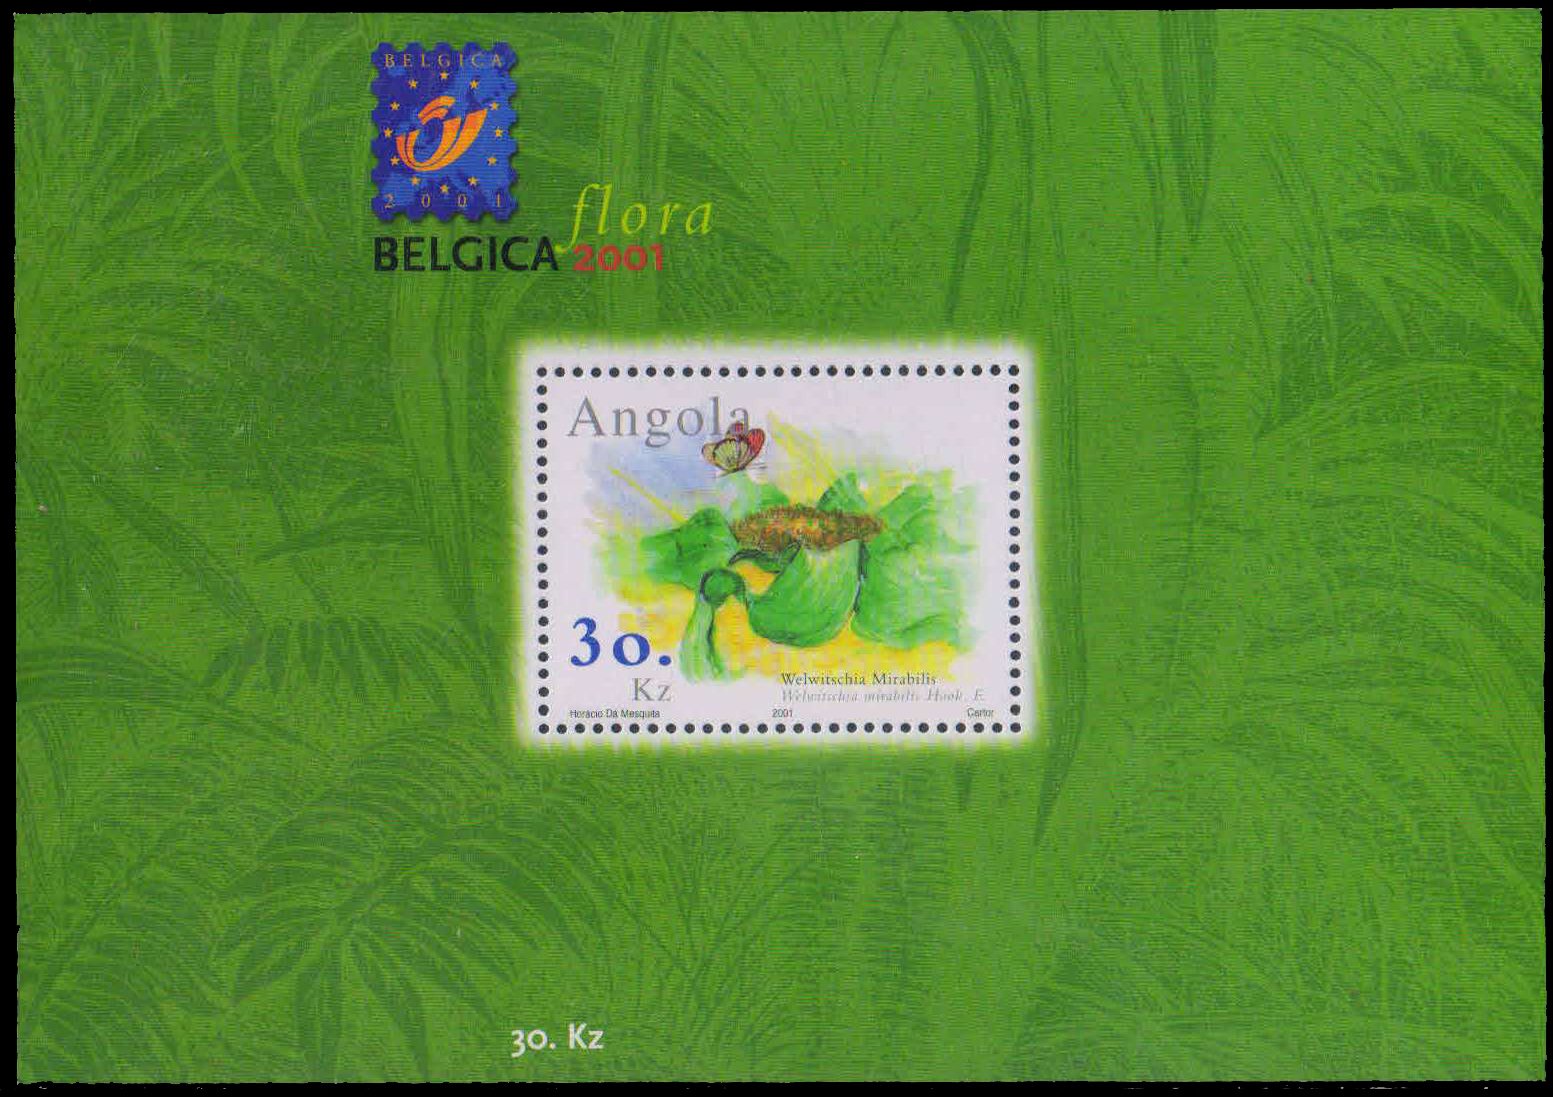 ANGOLA 2001-Flowers, Insect, Butterfly, Belgica International Stamp Exhibition, MS, MNH, S.G. MS 1618-Cat £ 10.50